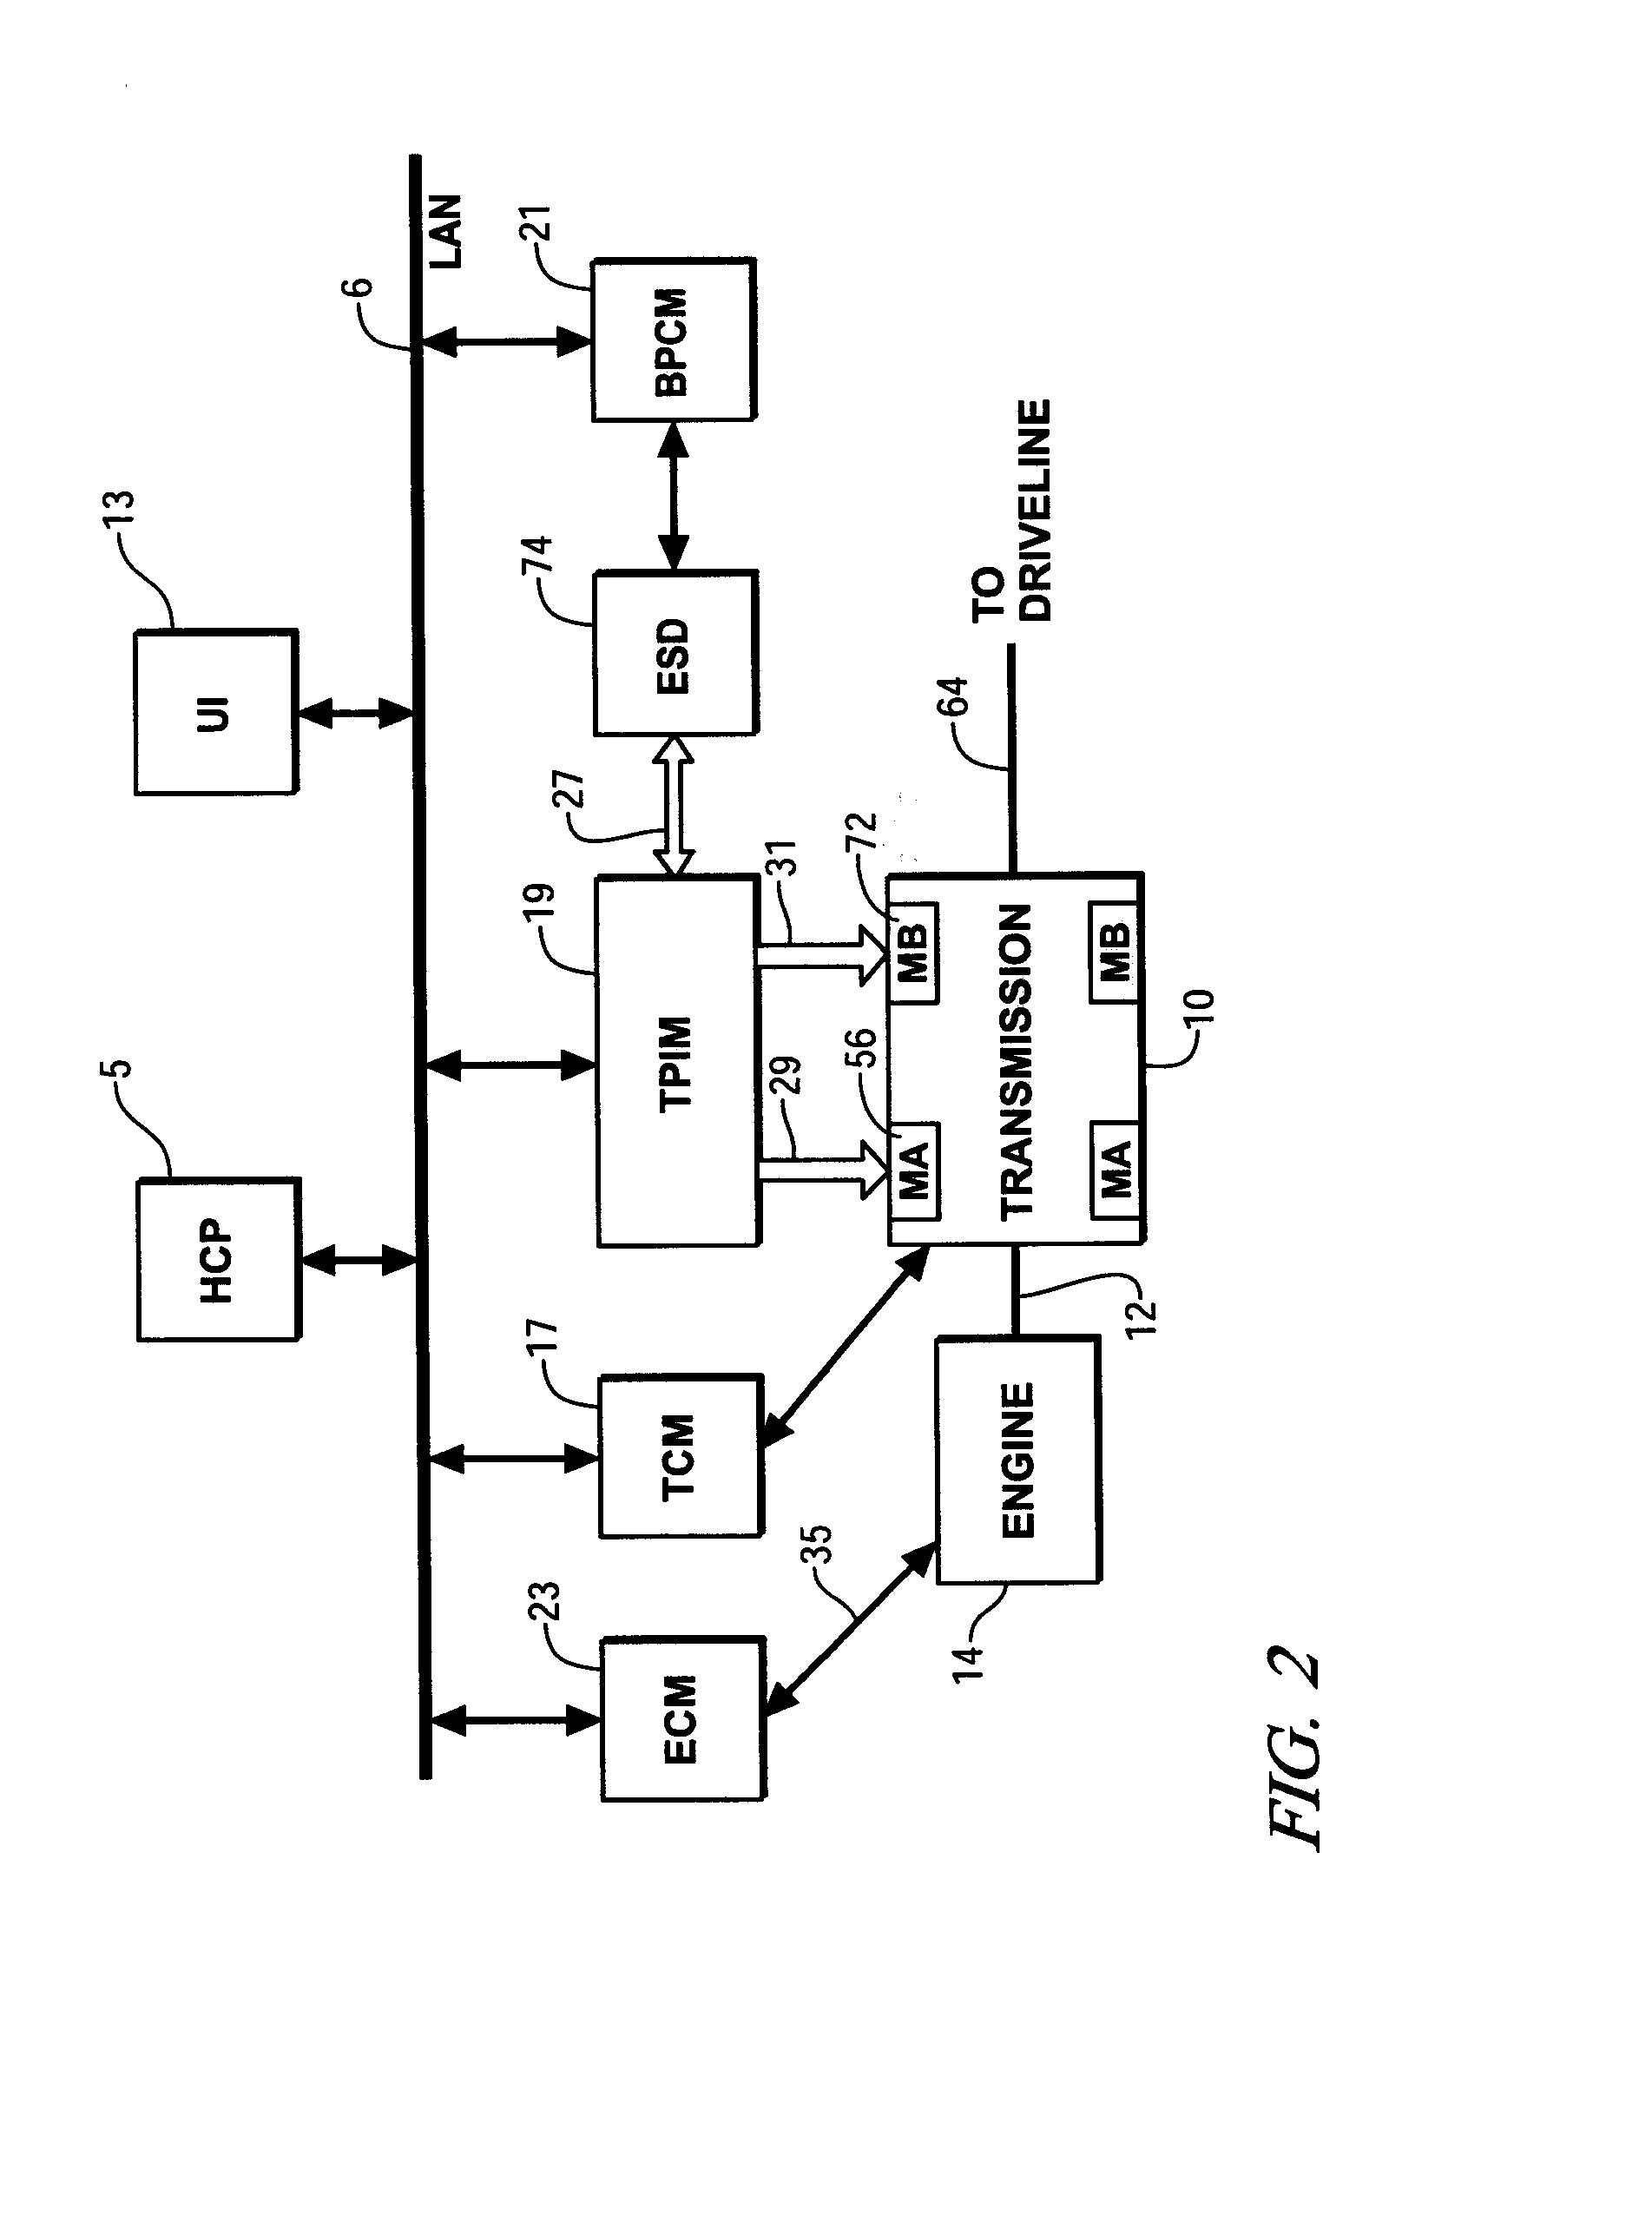 Apparatus and method to control transmission torque output during a gear-to-gear shift